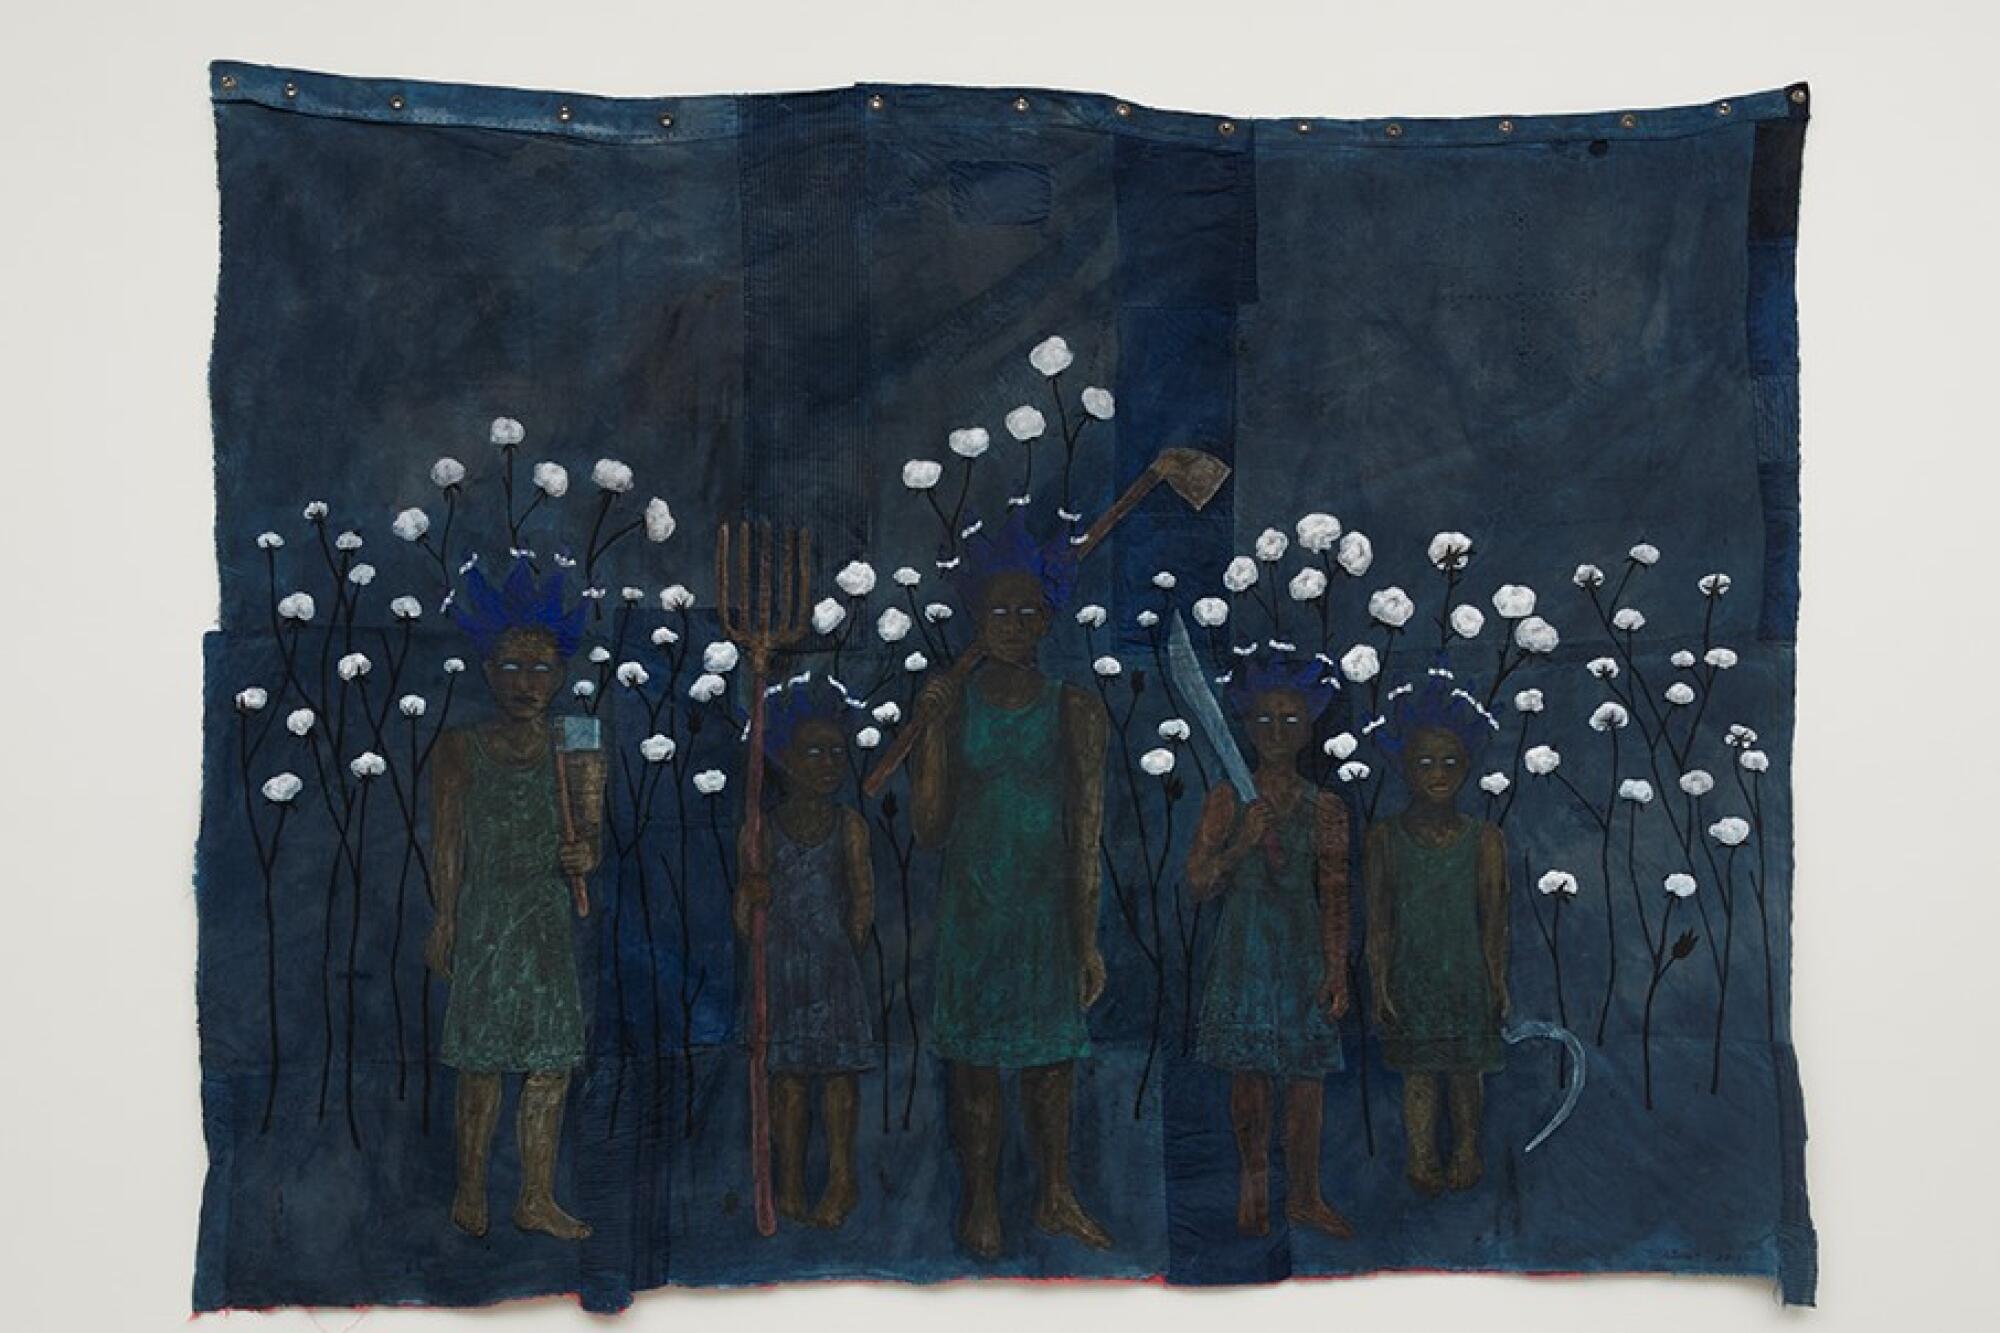 A painting on seed sack shows a group of Black female figures emerging from a cotton field in dim light.